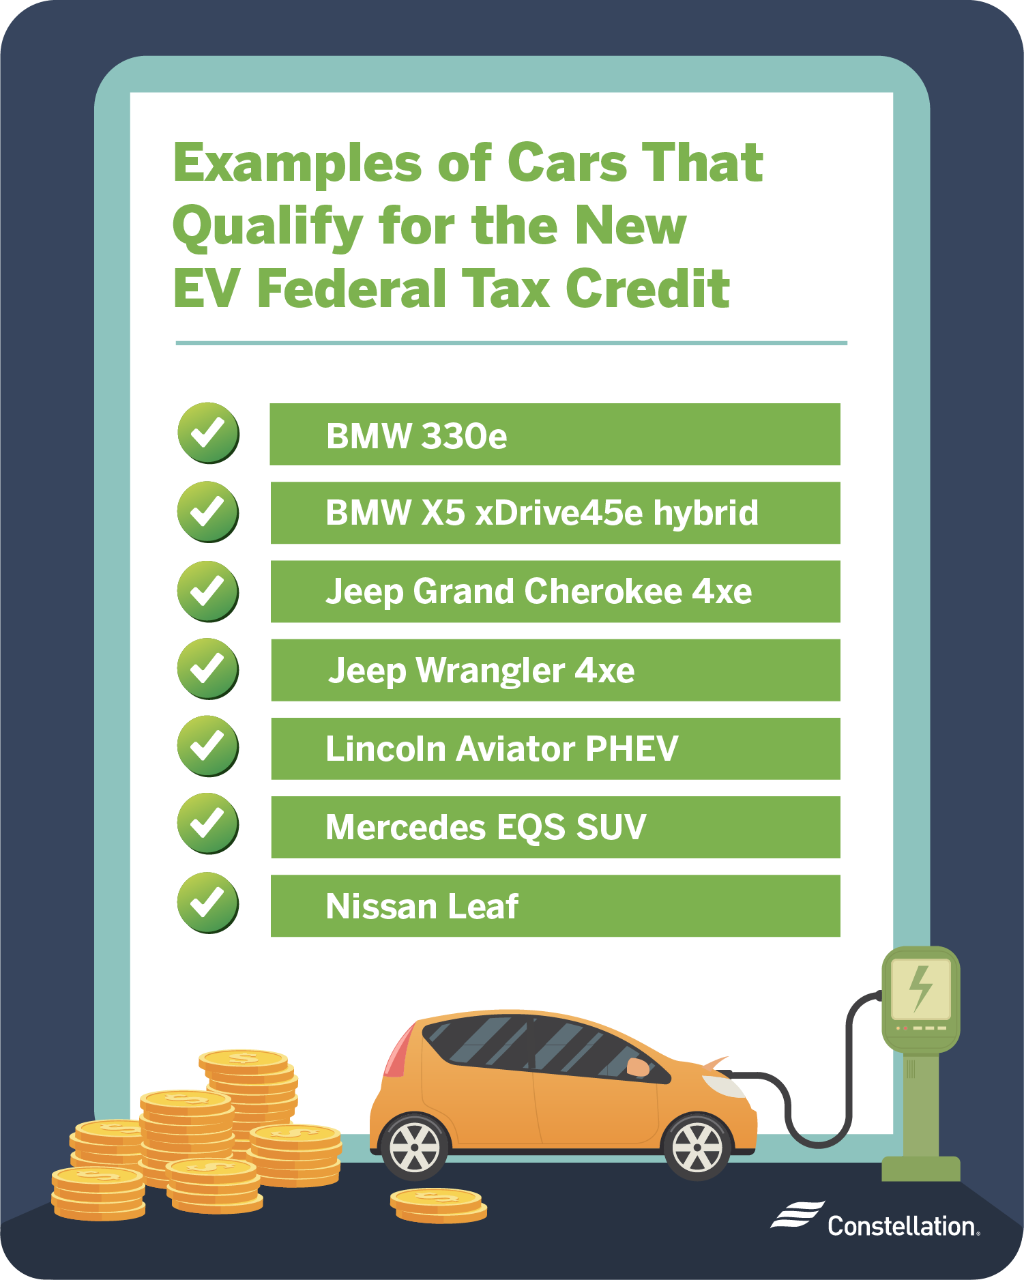 Which cars qualify under the new EV federal tax credit law?